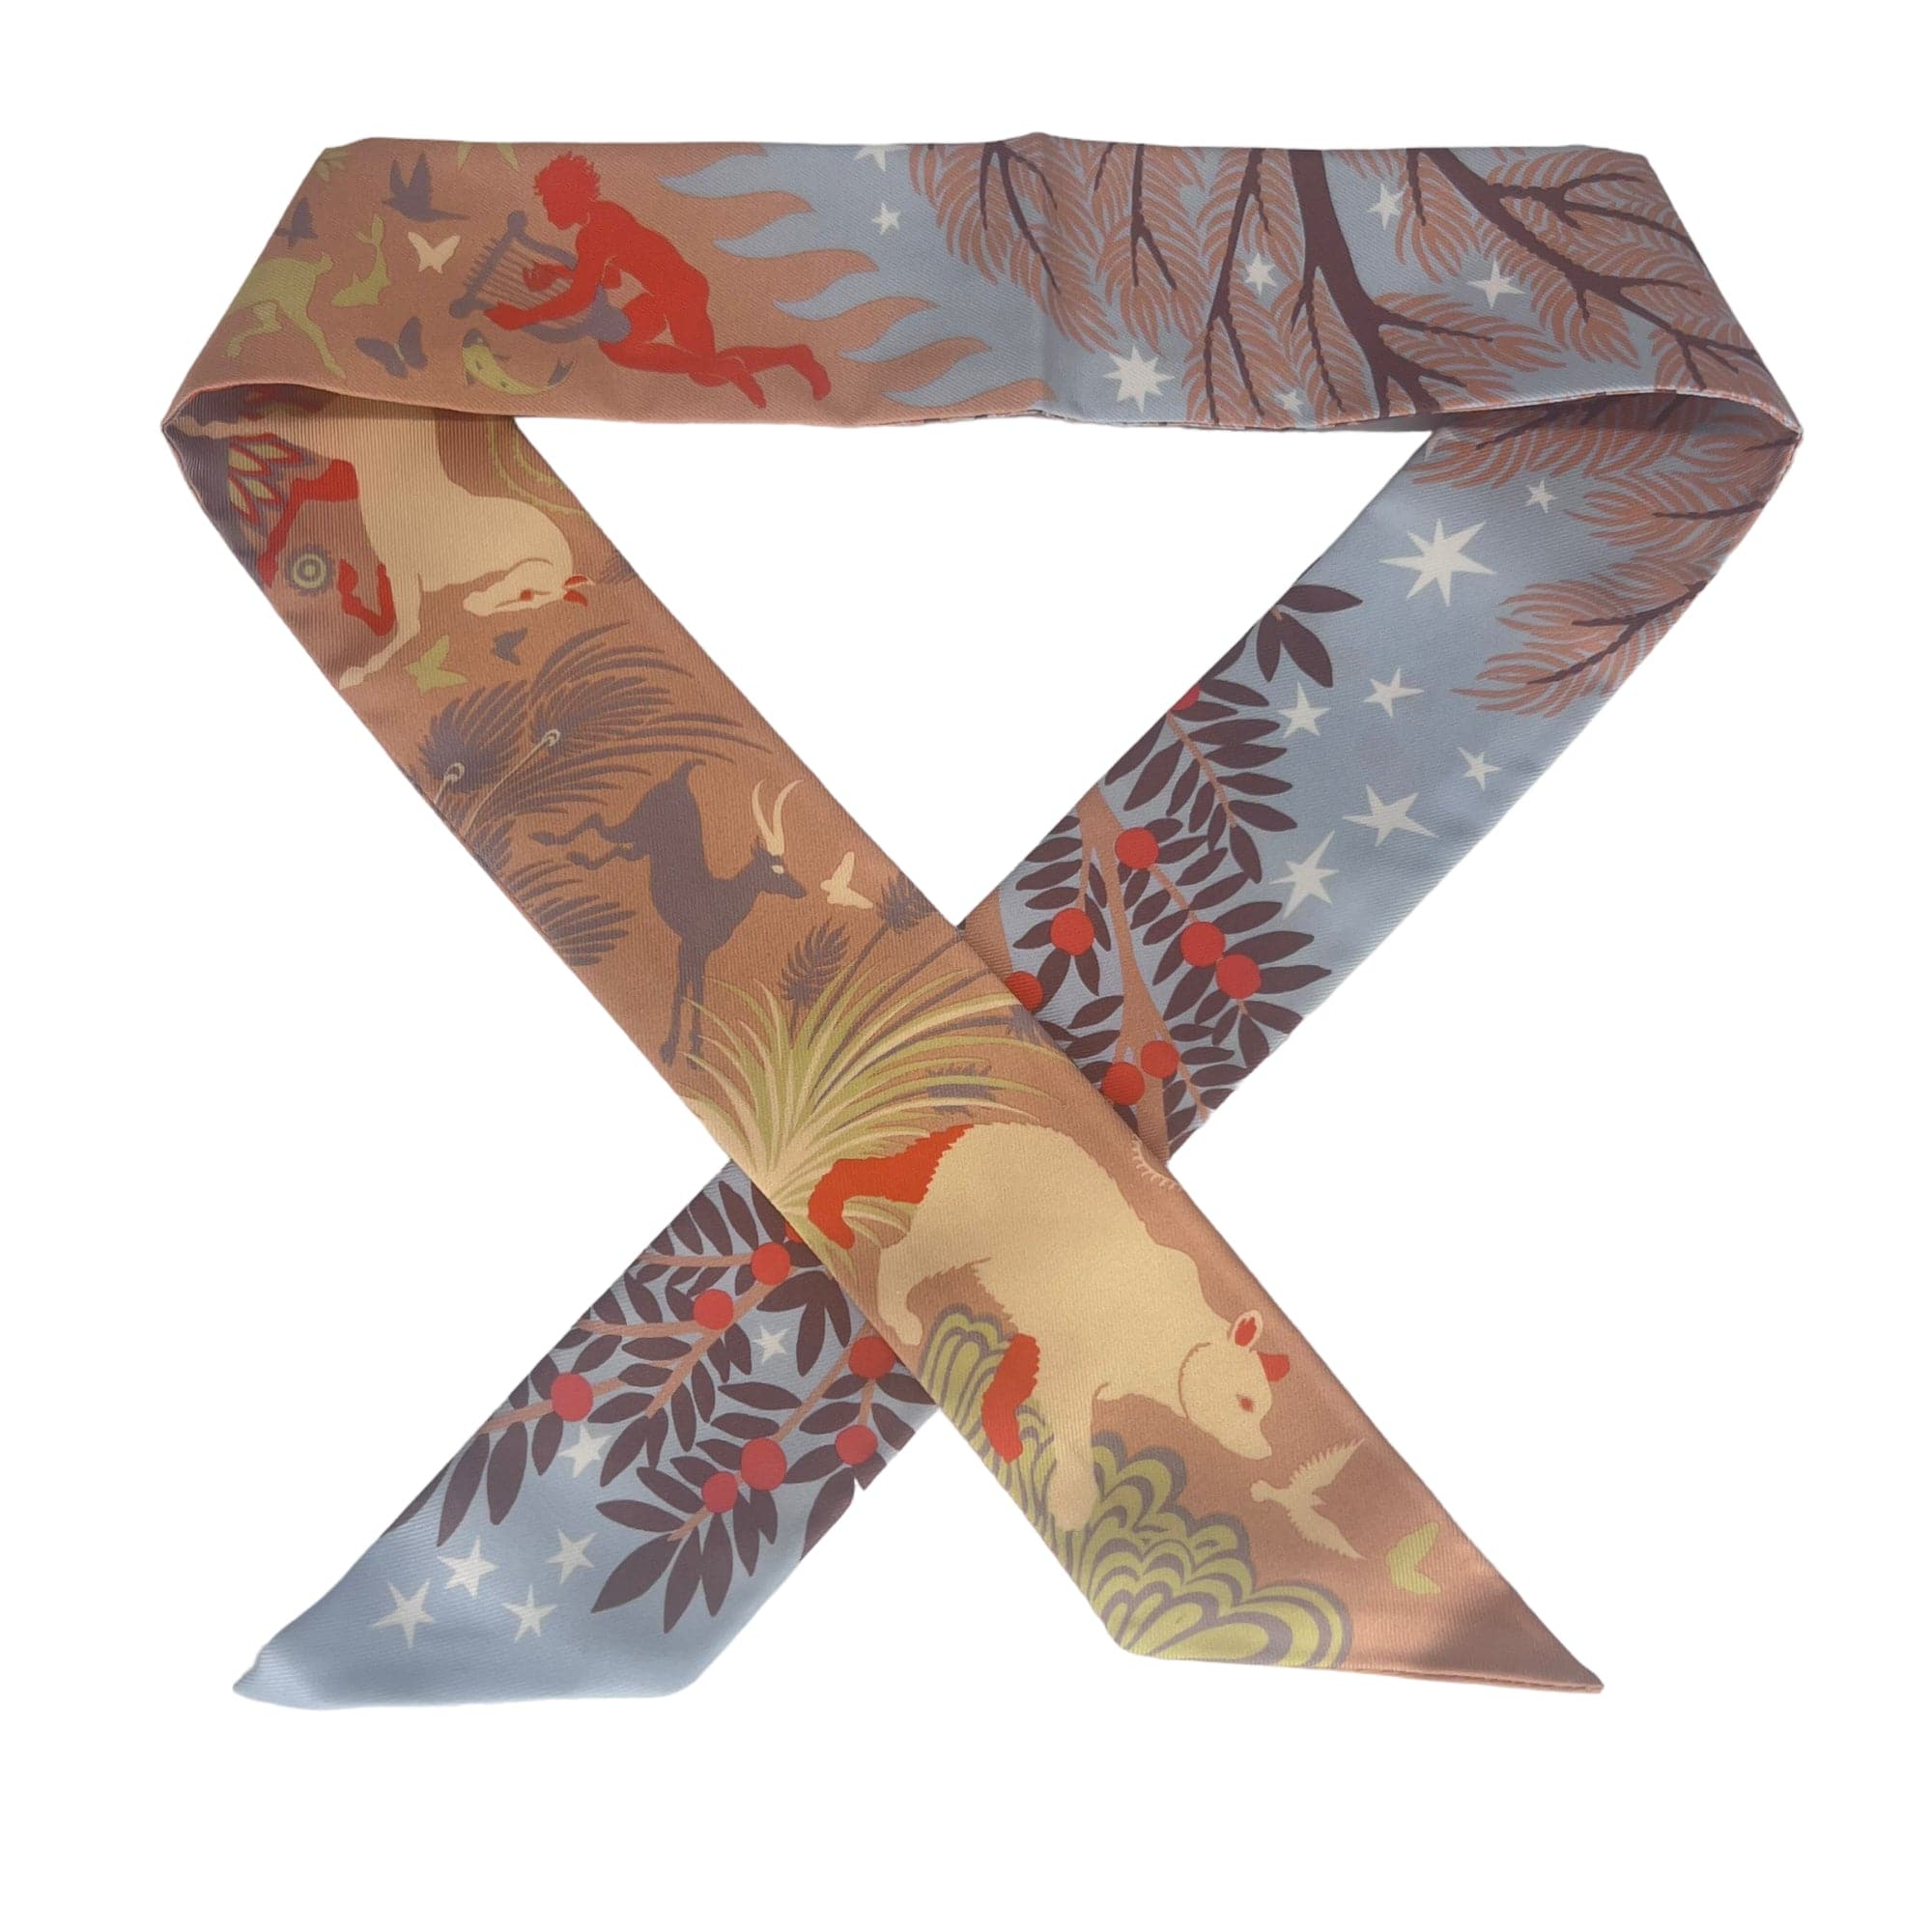 WagnPurr Shop Hermès Sous Le Charme d'Orphee Silk Twilly Scarf - Multicolored New w/out Tags